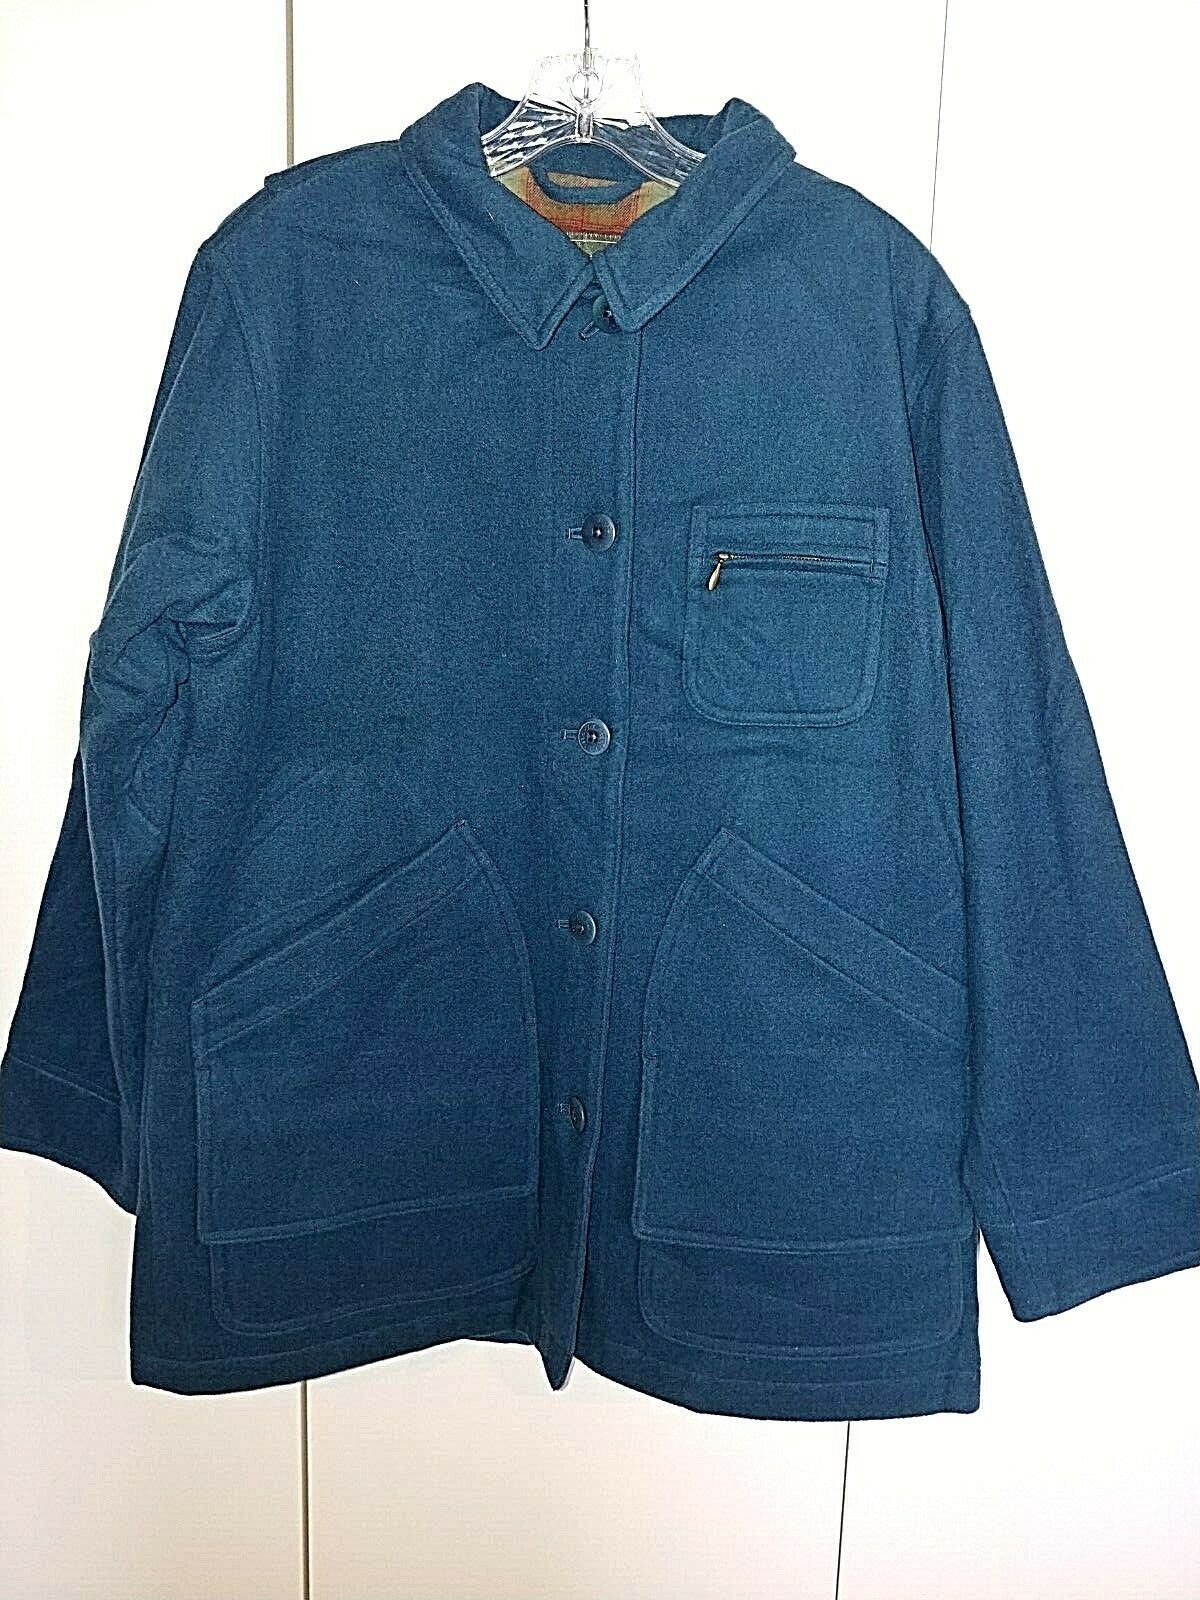 Primary image for L. L. BEAN LADIES BLUE WOOL BLEND BLUE JACKET-PM-WORN ONCE-LARGE POCKETS-GREAT